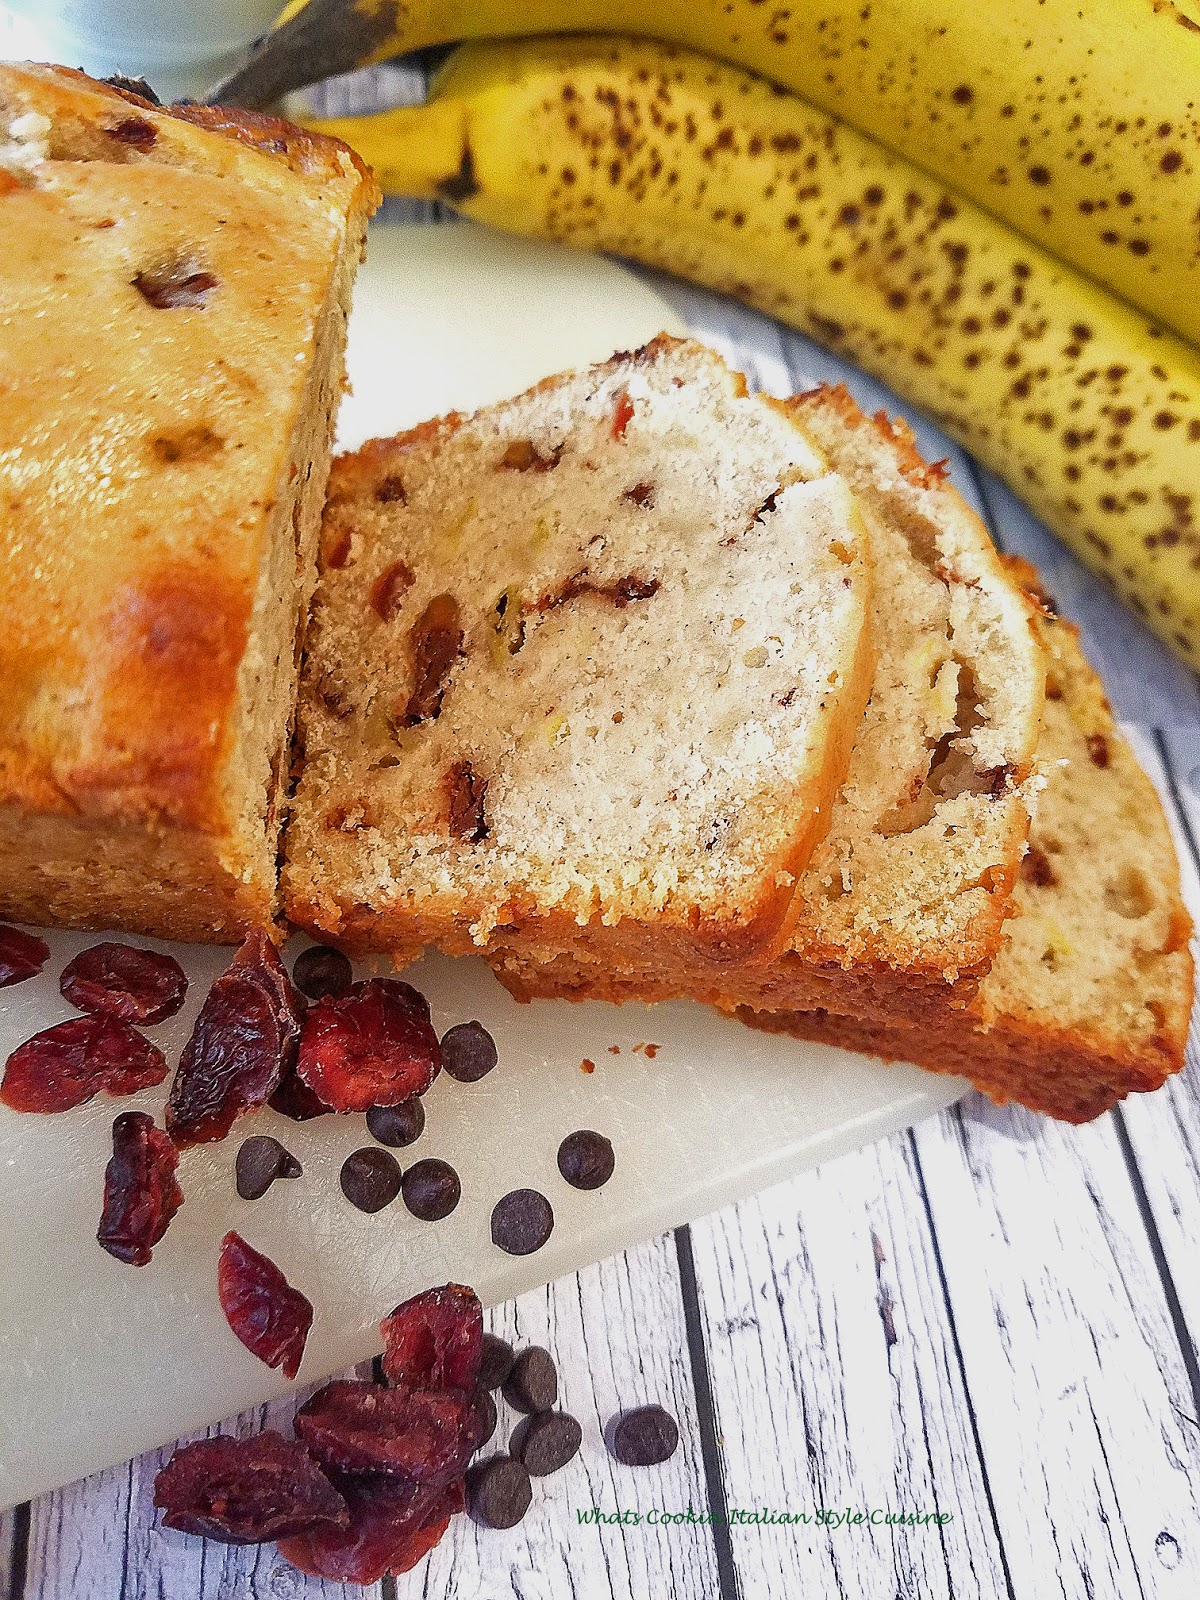 Banana bread with dried cherries and chocolate chips taste like a chocolate  covered cherry banana bread easy and simple to make banana bread on a cutting board ready to slice up and eat